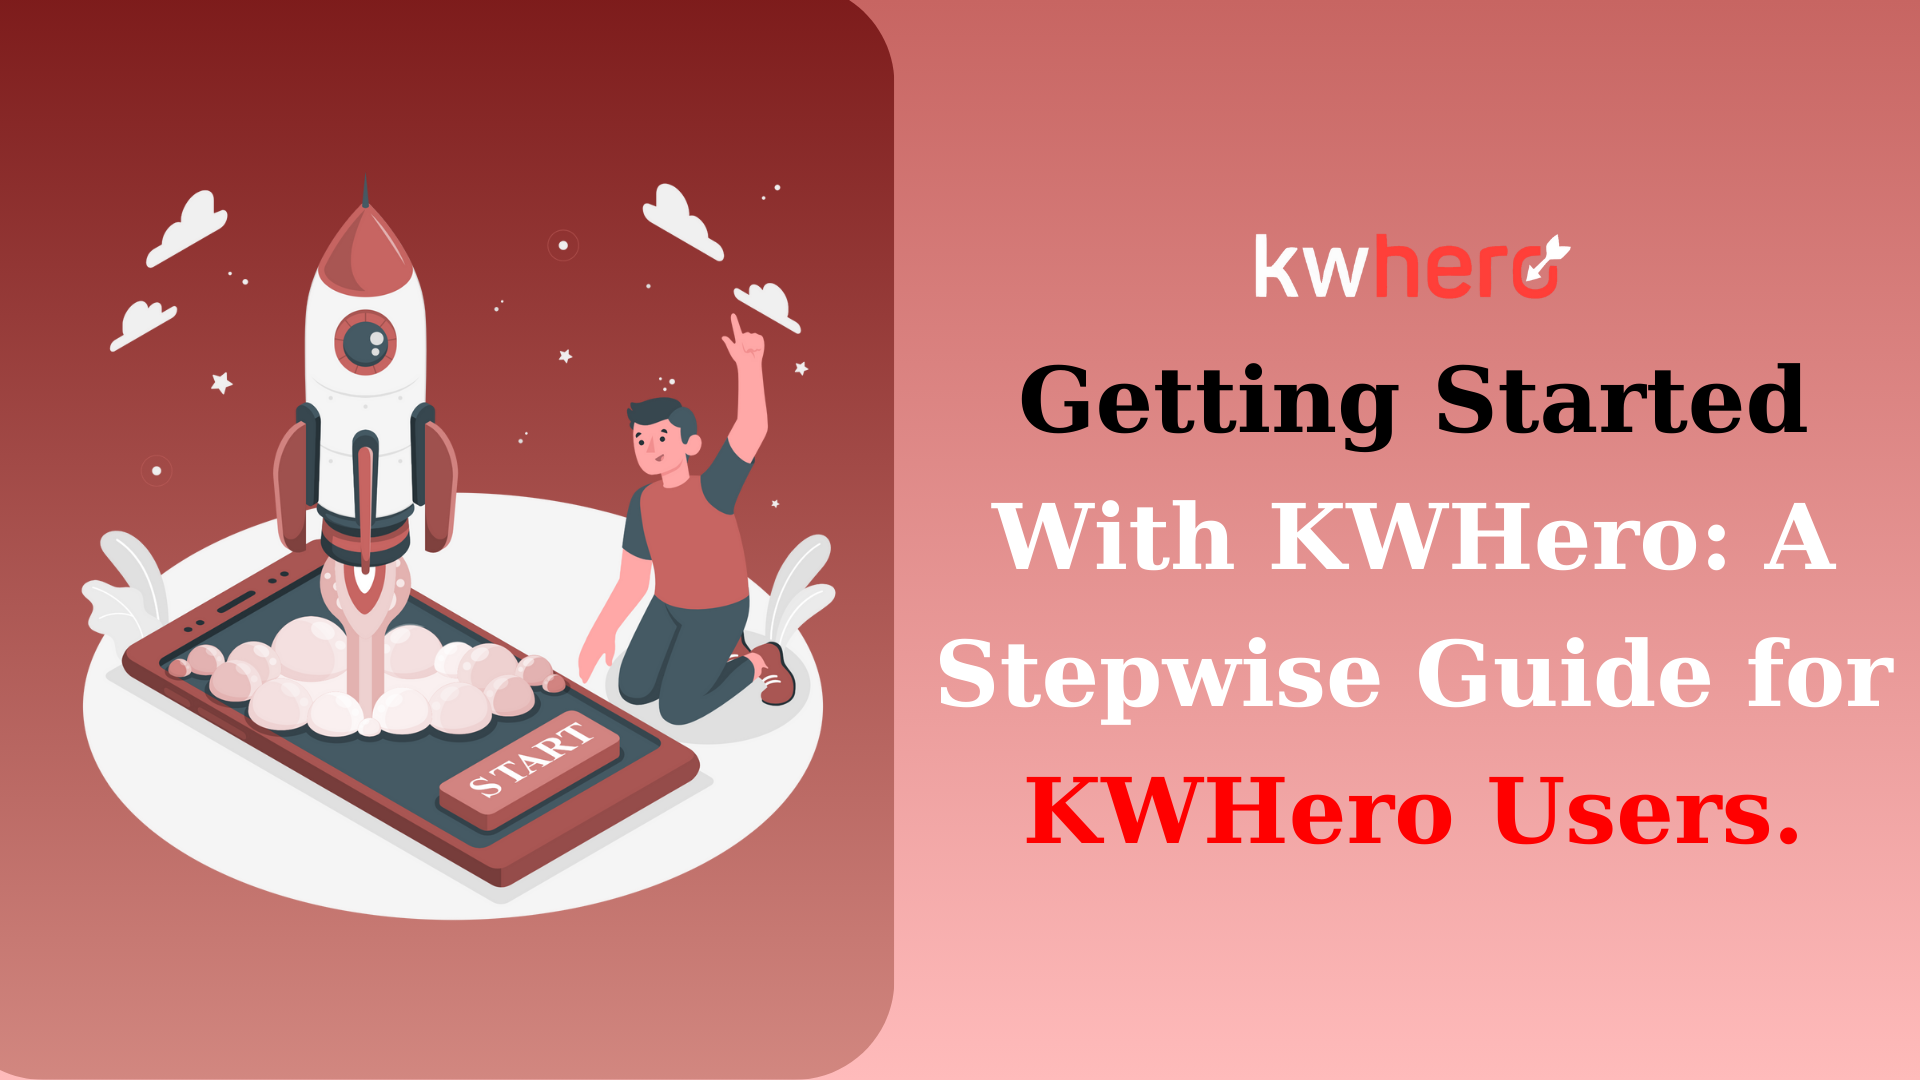 Quick guide to help KWHero users get started.